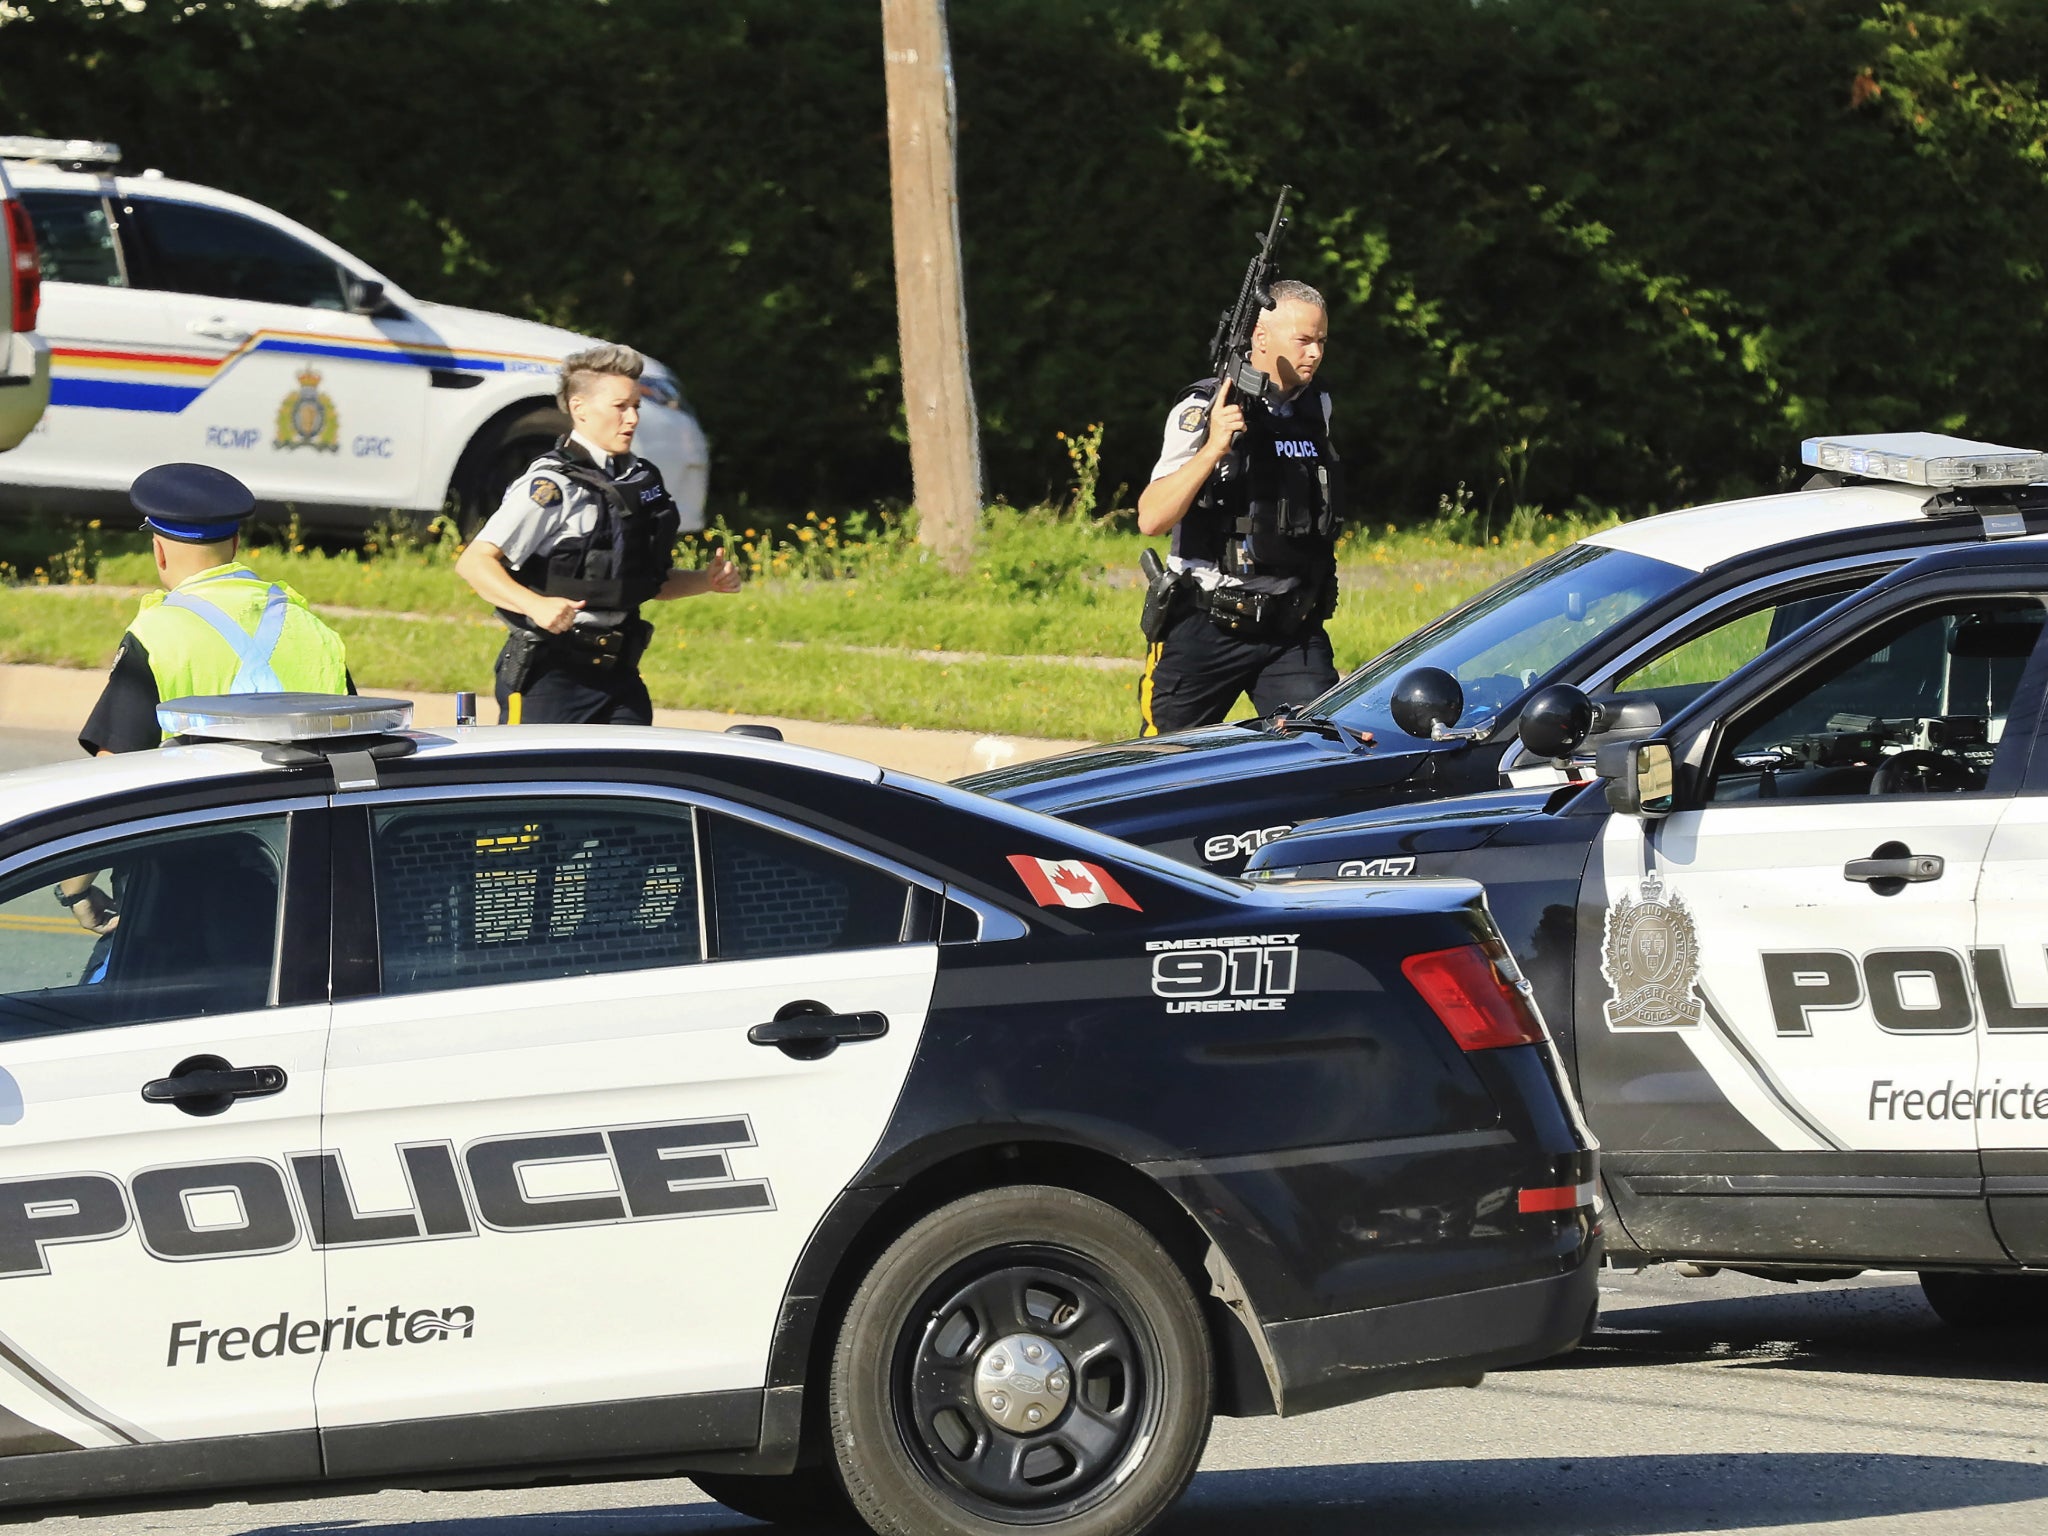 Police and RCMP officers survey the area of a shooting in Fredericton, New Brunswick, Canada on 10 August 2018.